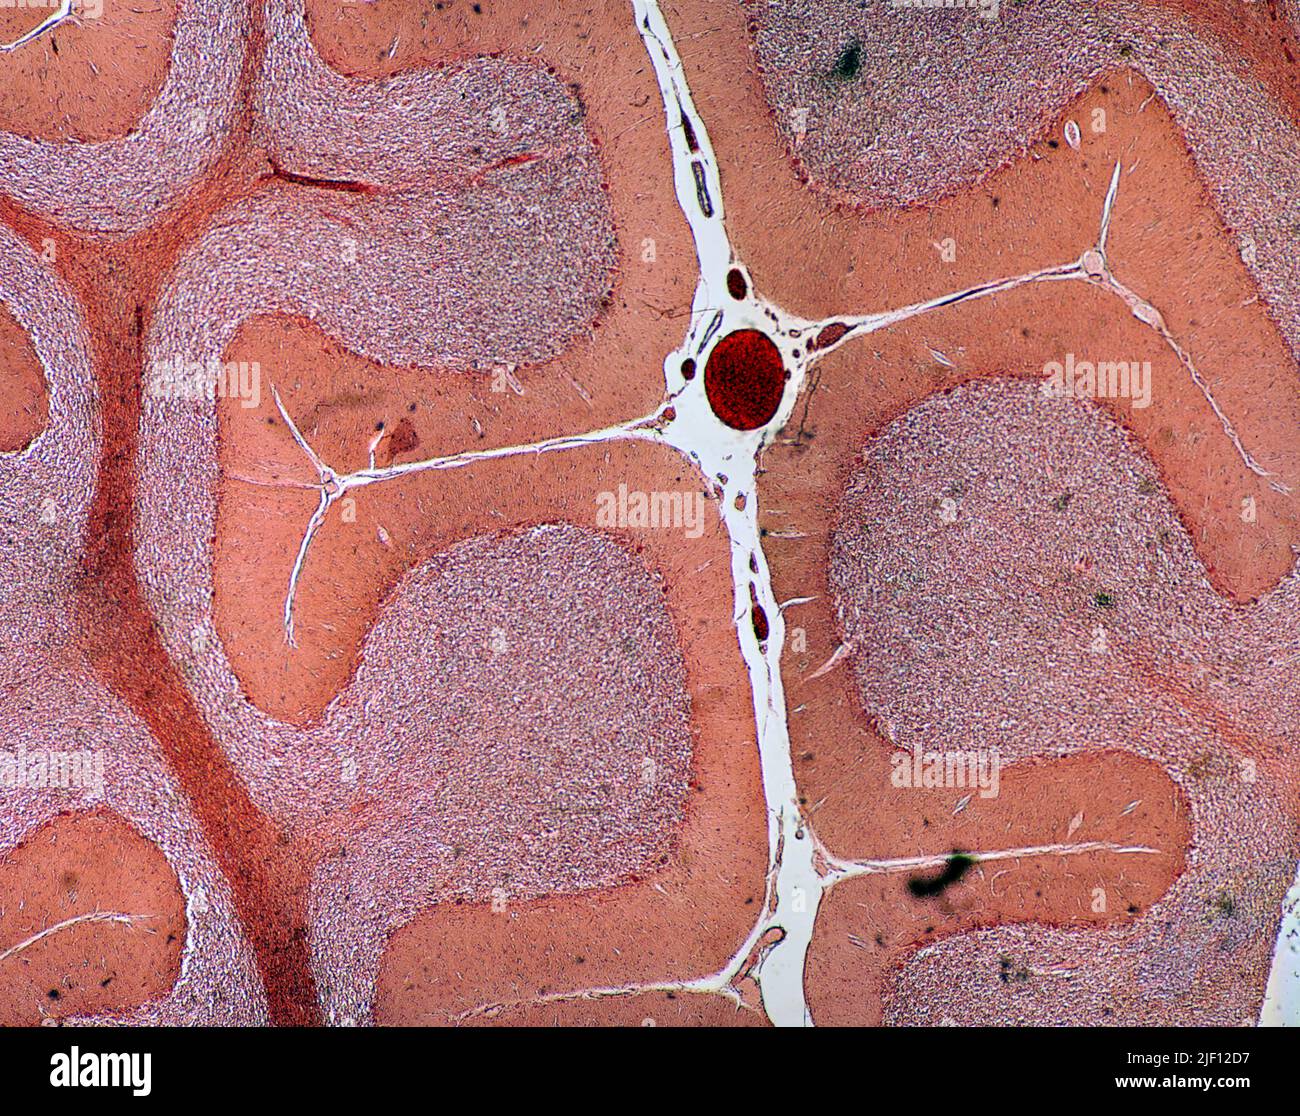 Section of the Little Brain (Cerebellum) with Purkinje cells. Stock Photo